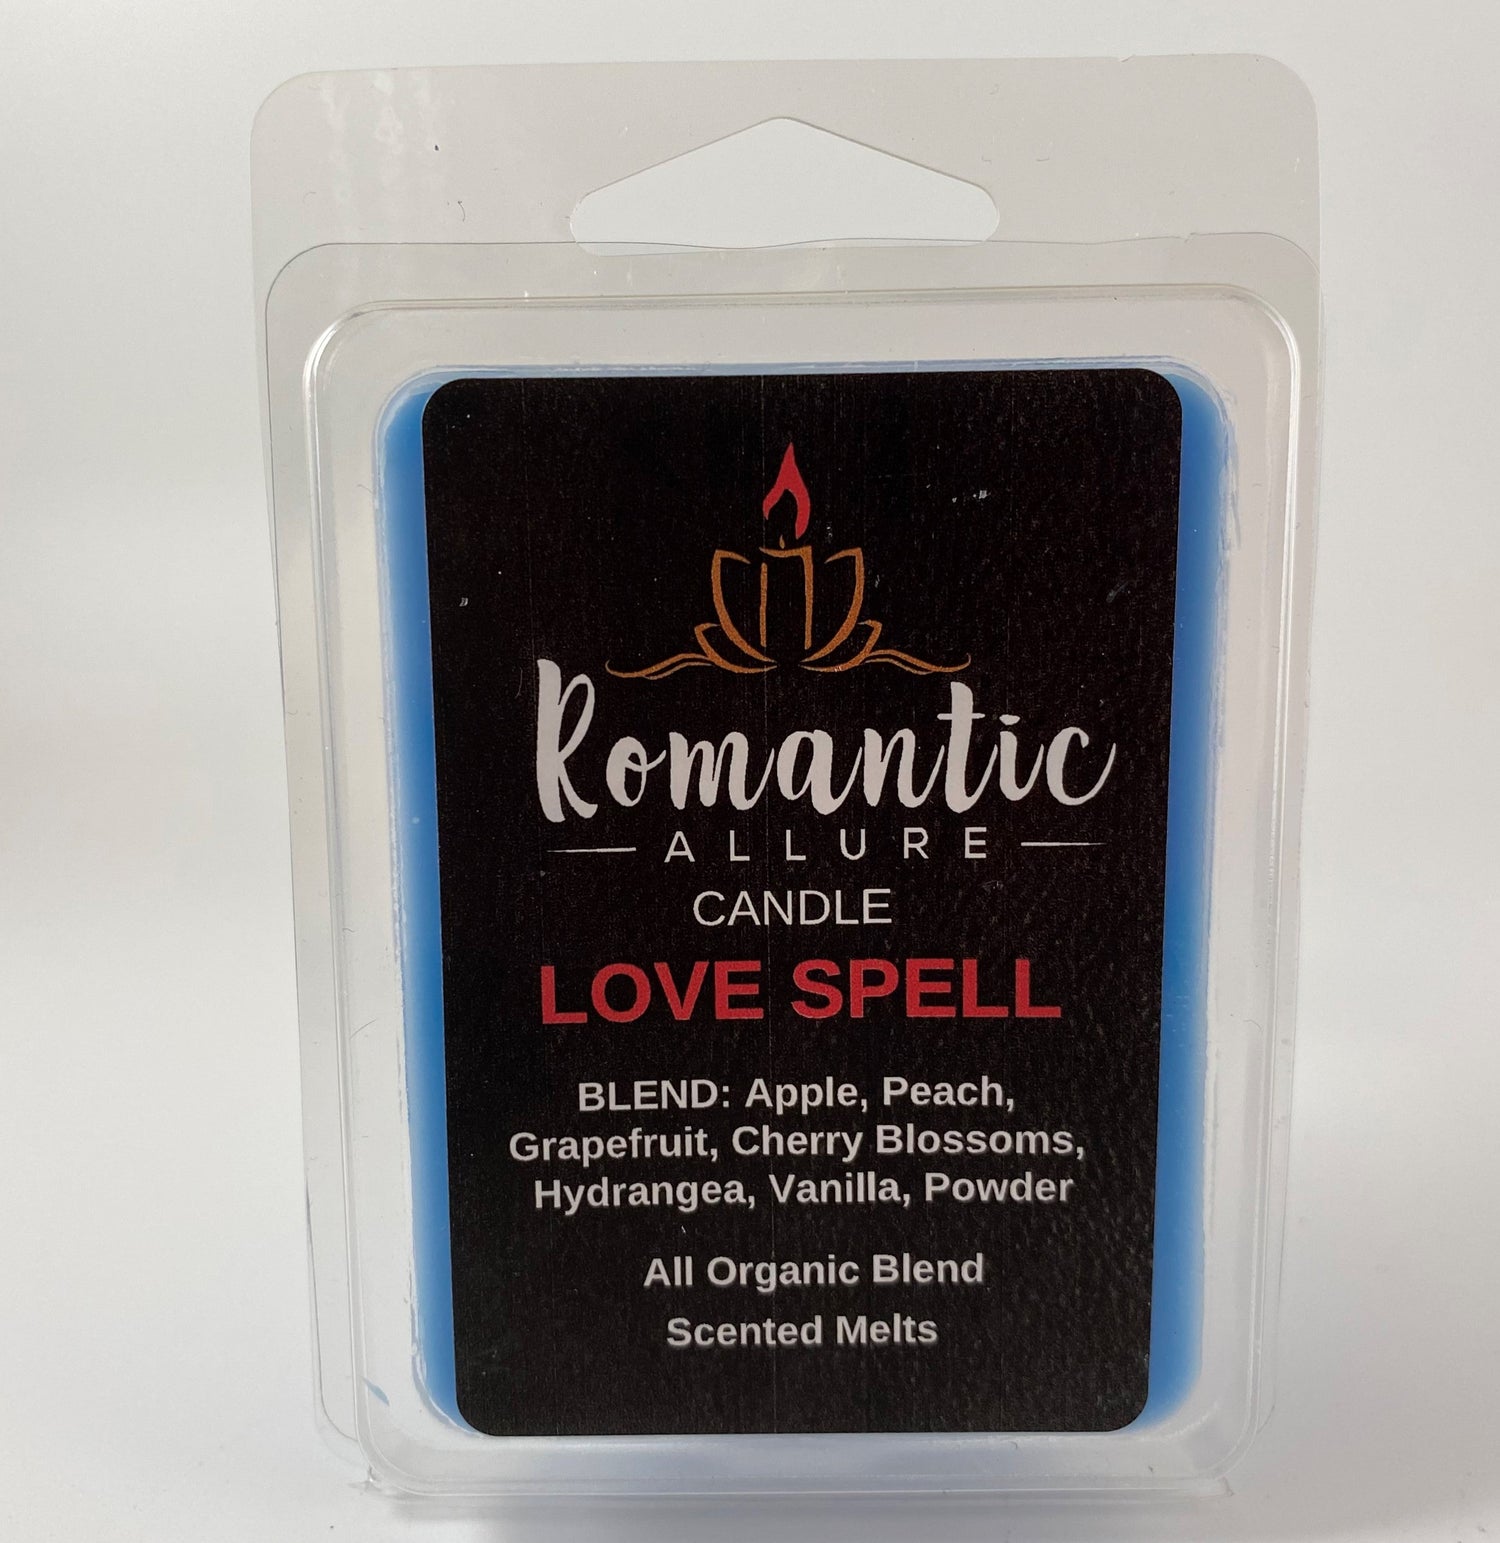 Love Spell Wax Melt - Romantic Allure Candle Company